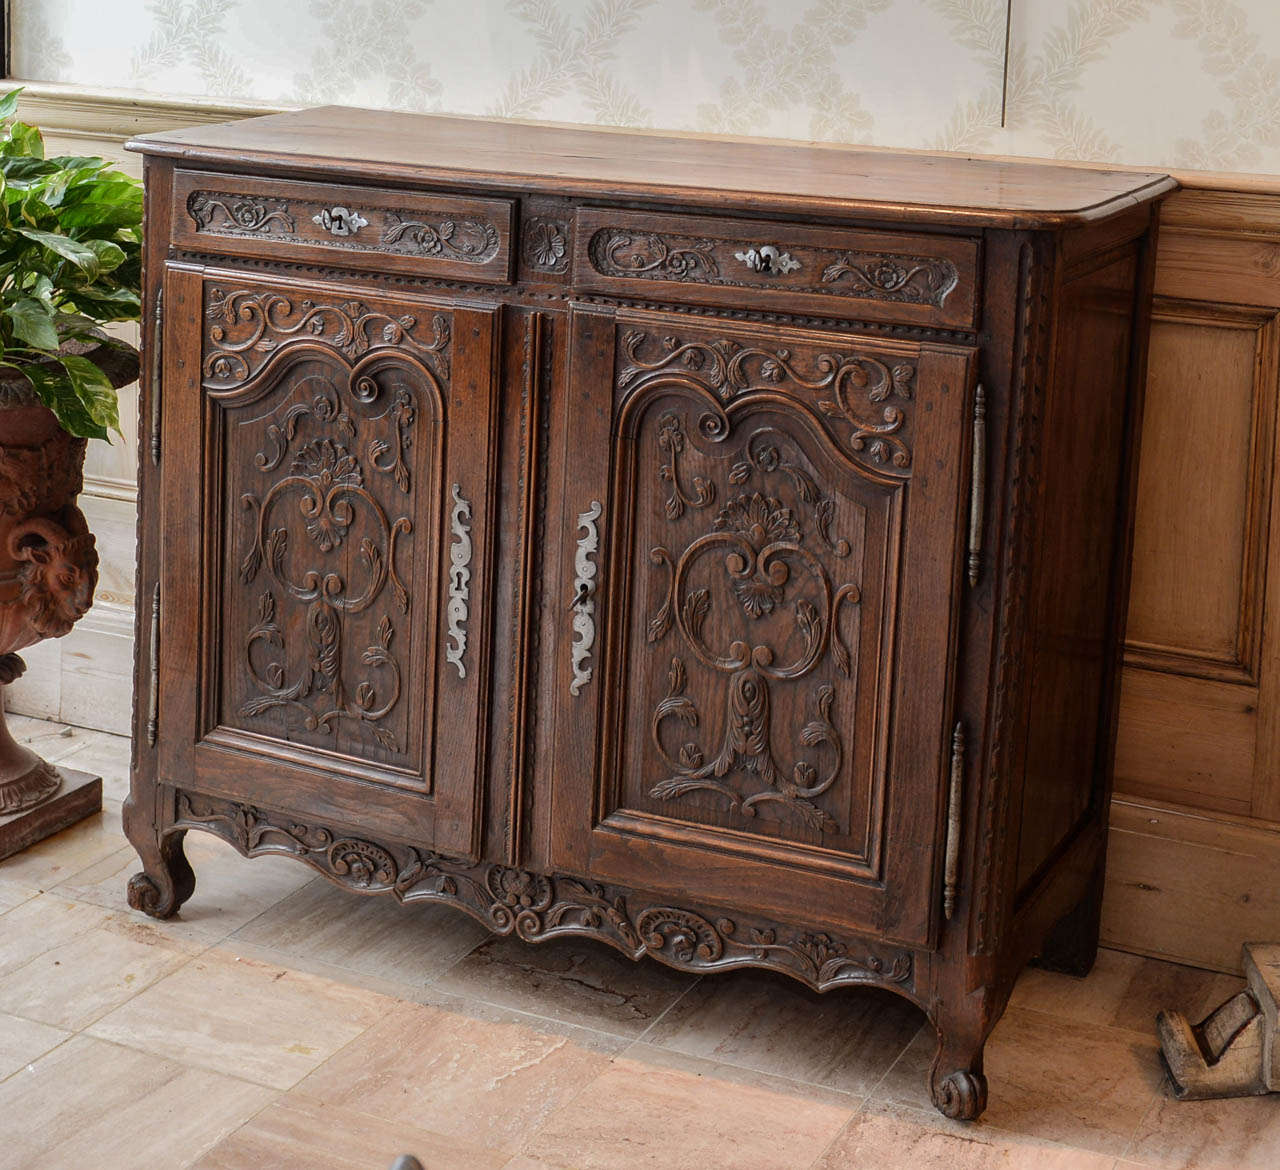 19th Century Carved Oak Buffet, Circa 1860
This is a wonderful rustic piece that will add charm to a mountain house or any informal home.  It is a good height for serving and has lots of storage making it perfect for a dining room but would also do